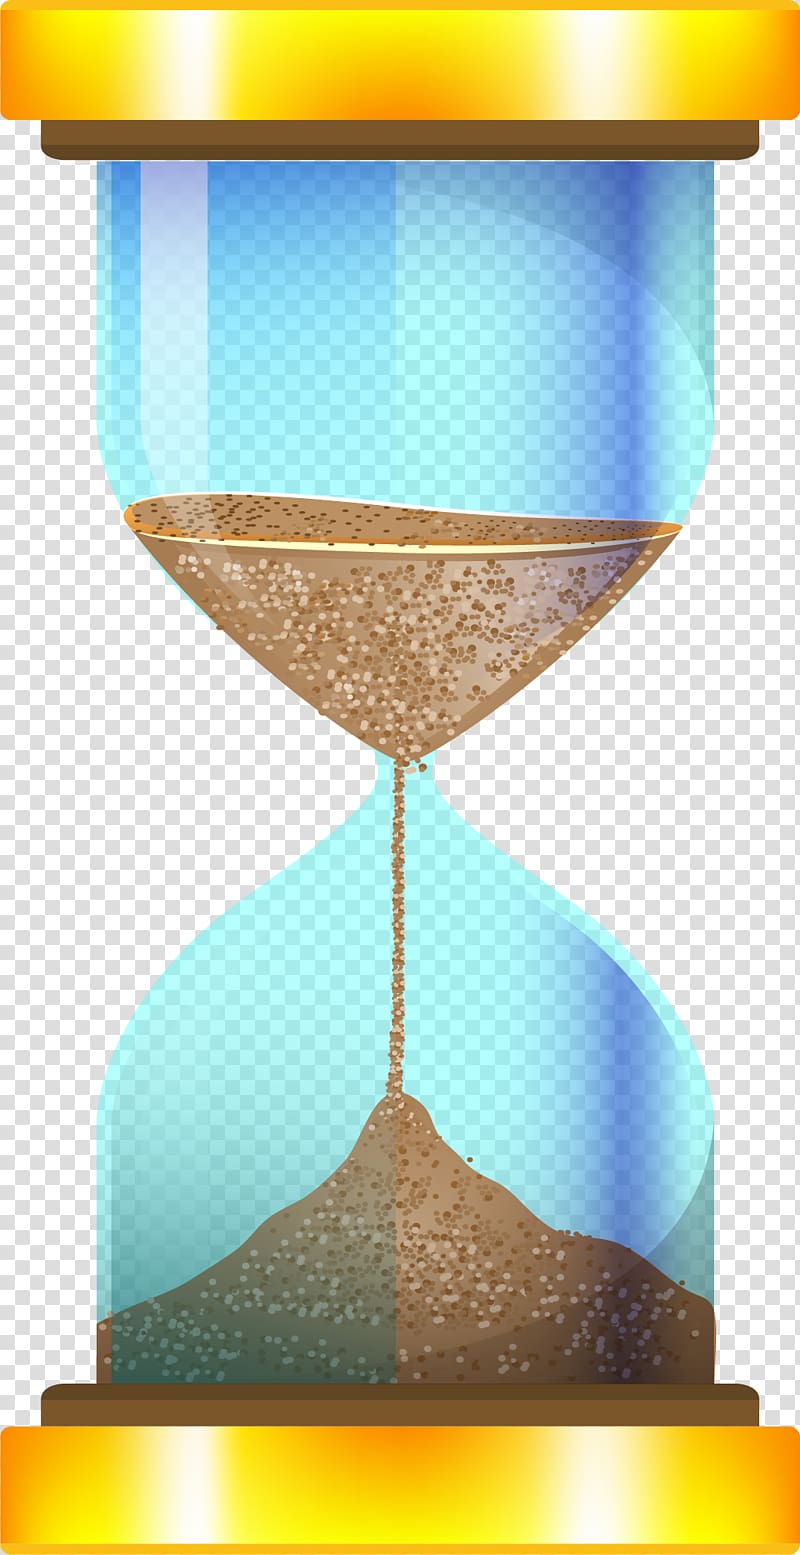 Hourglass Transparency and translucency Funnel, glass hourglass transparent background PNG clipart